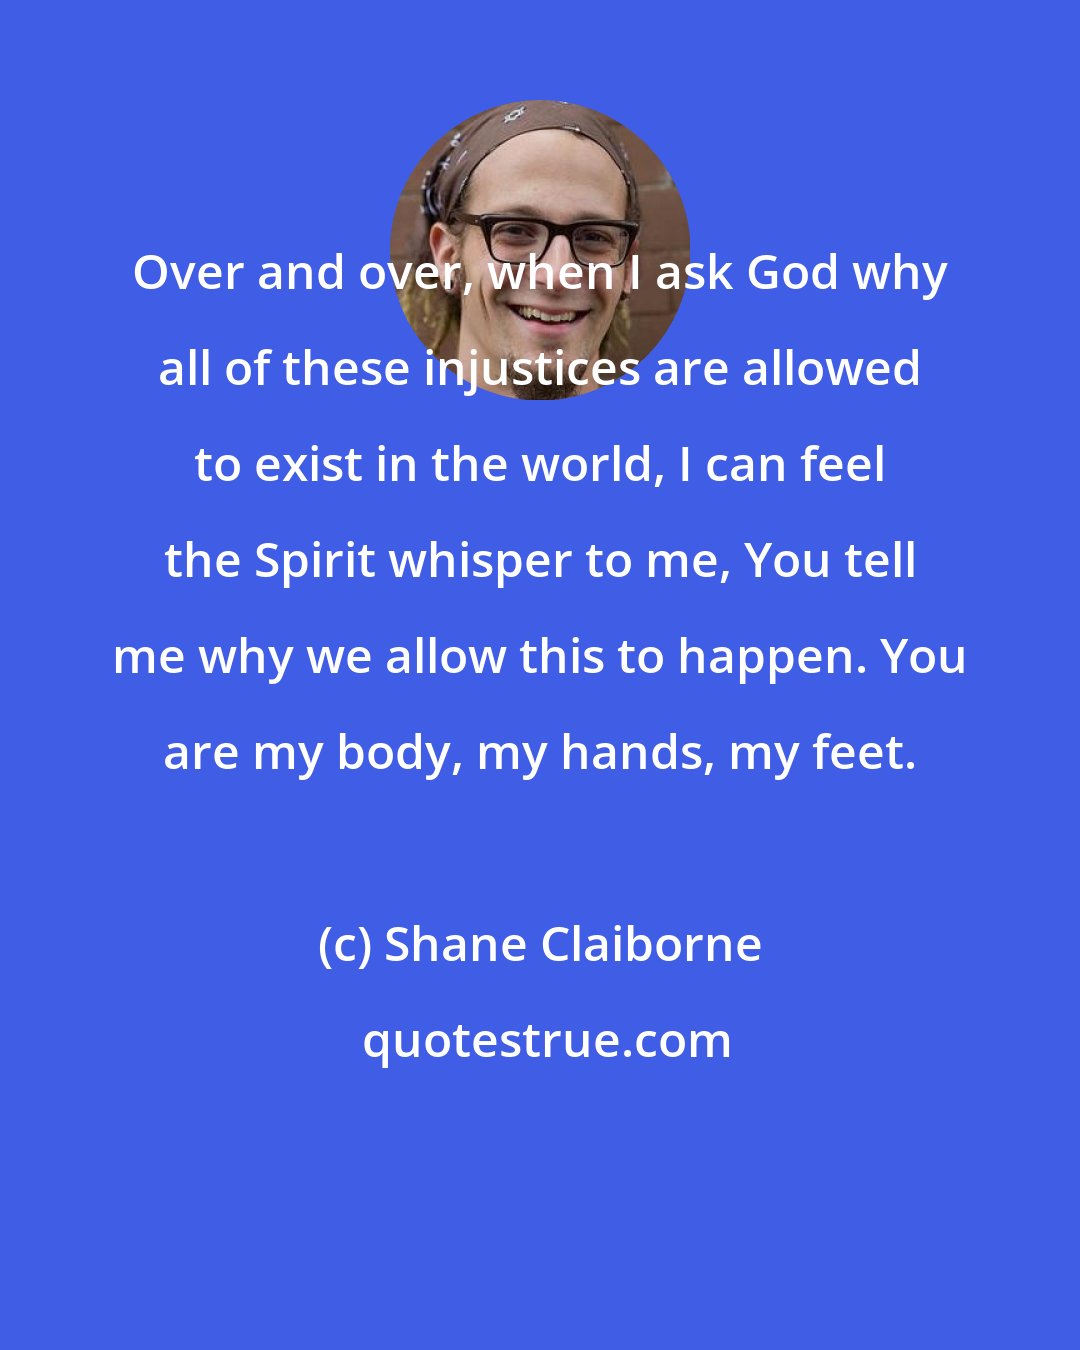 Shane Claiborne: Over and over, when I ask God why all of these injustices are allowed to exist in the world, I can feel the Spirit whisper to me, You tell me why we allow this to happen. You are my body, my hands, my feet.